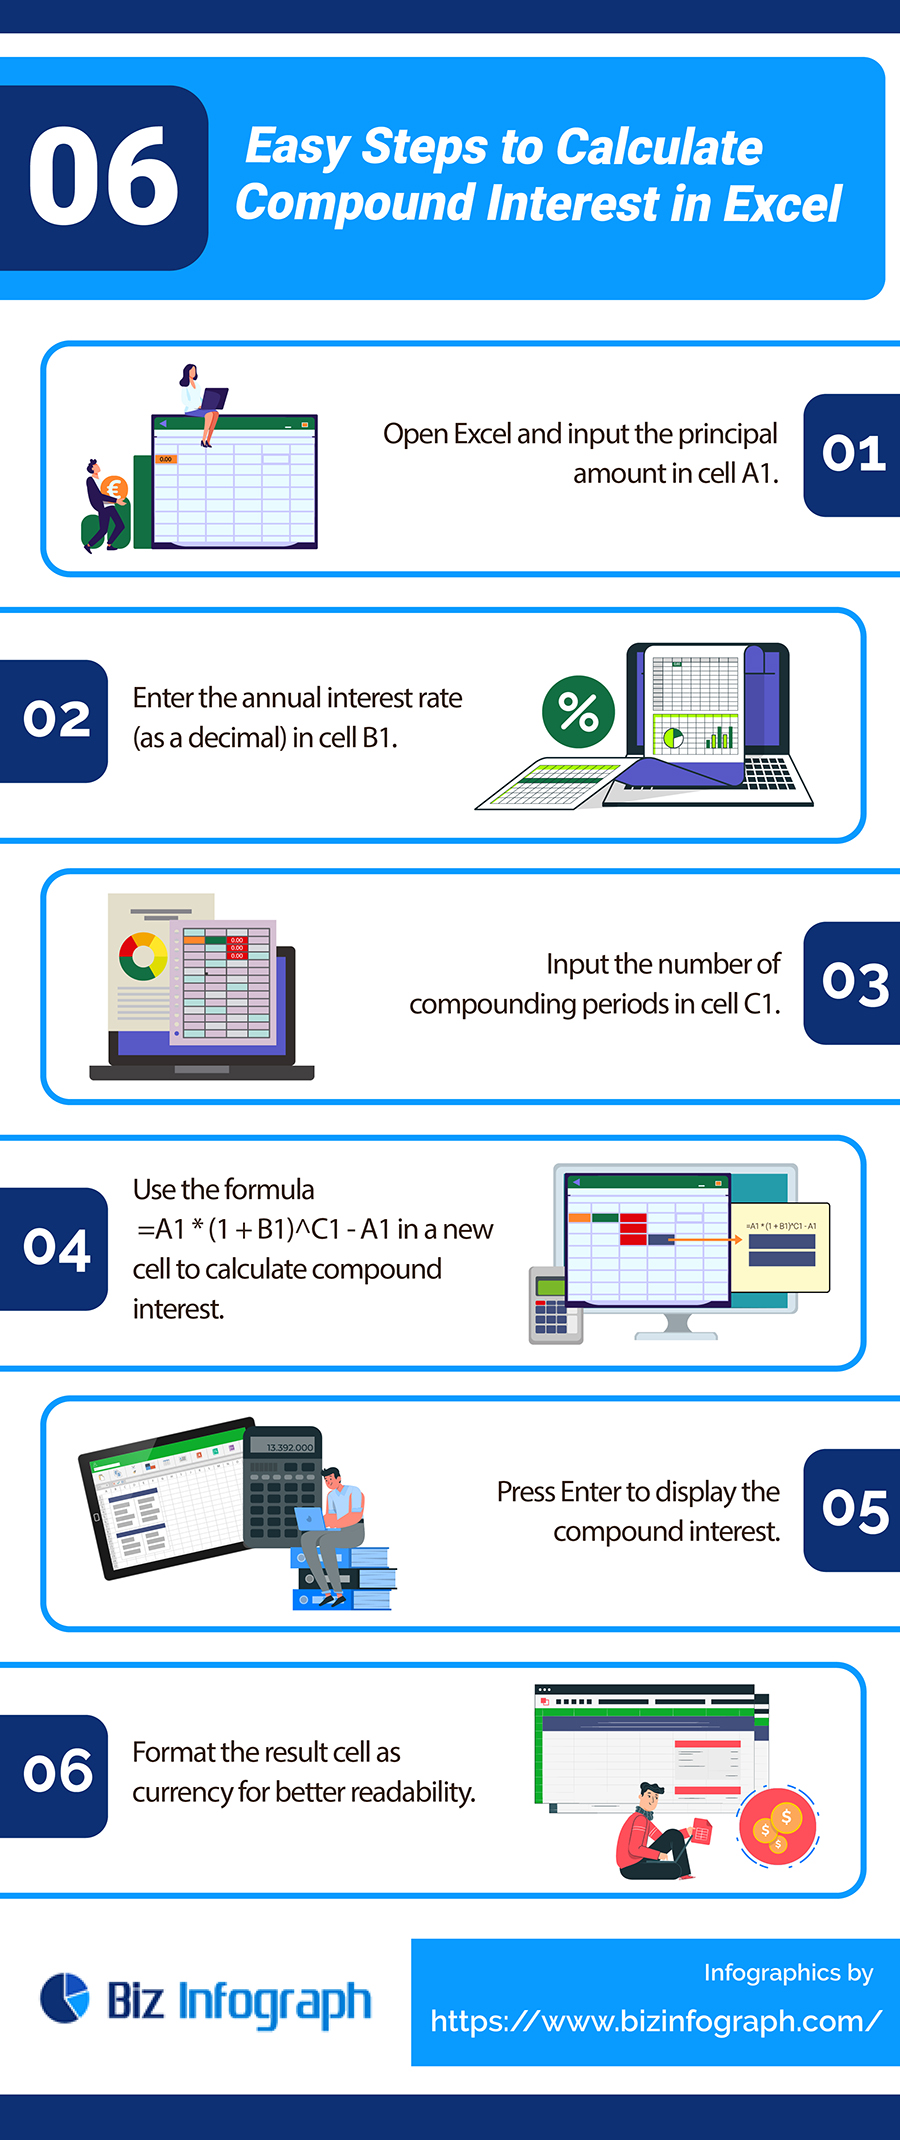 Easy Steps to Calculate Compound Interest in Excel 